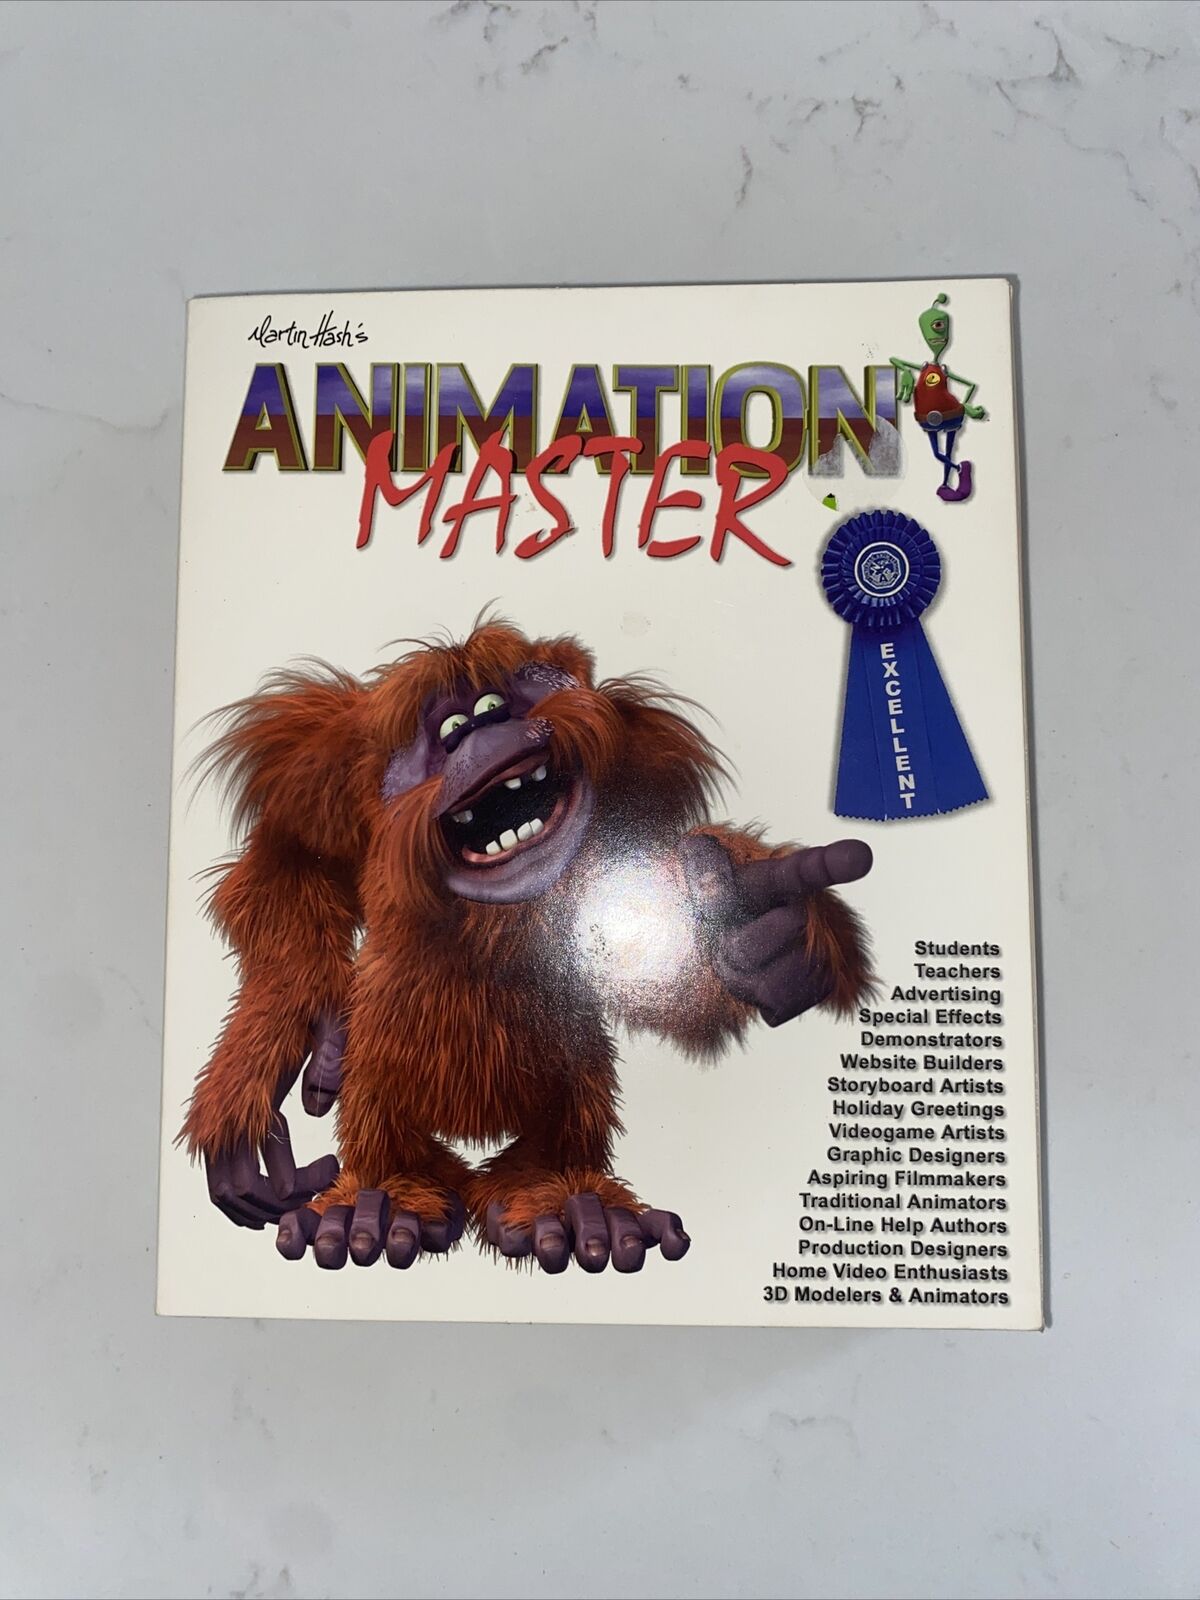 Martin Hash\'s Animation Master, The Art of Animation Master book Missing CD